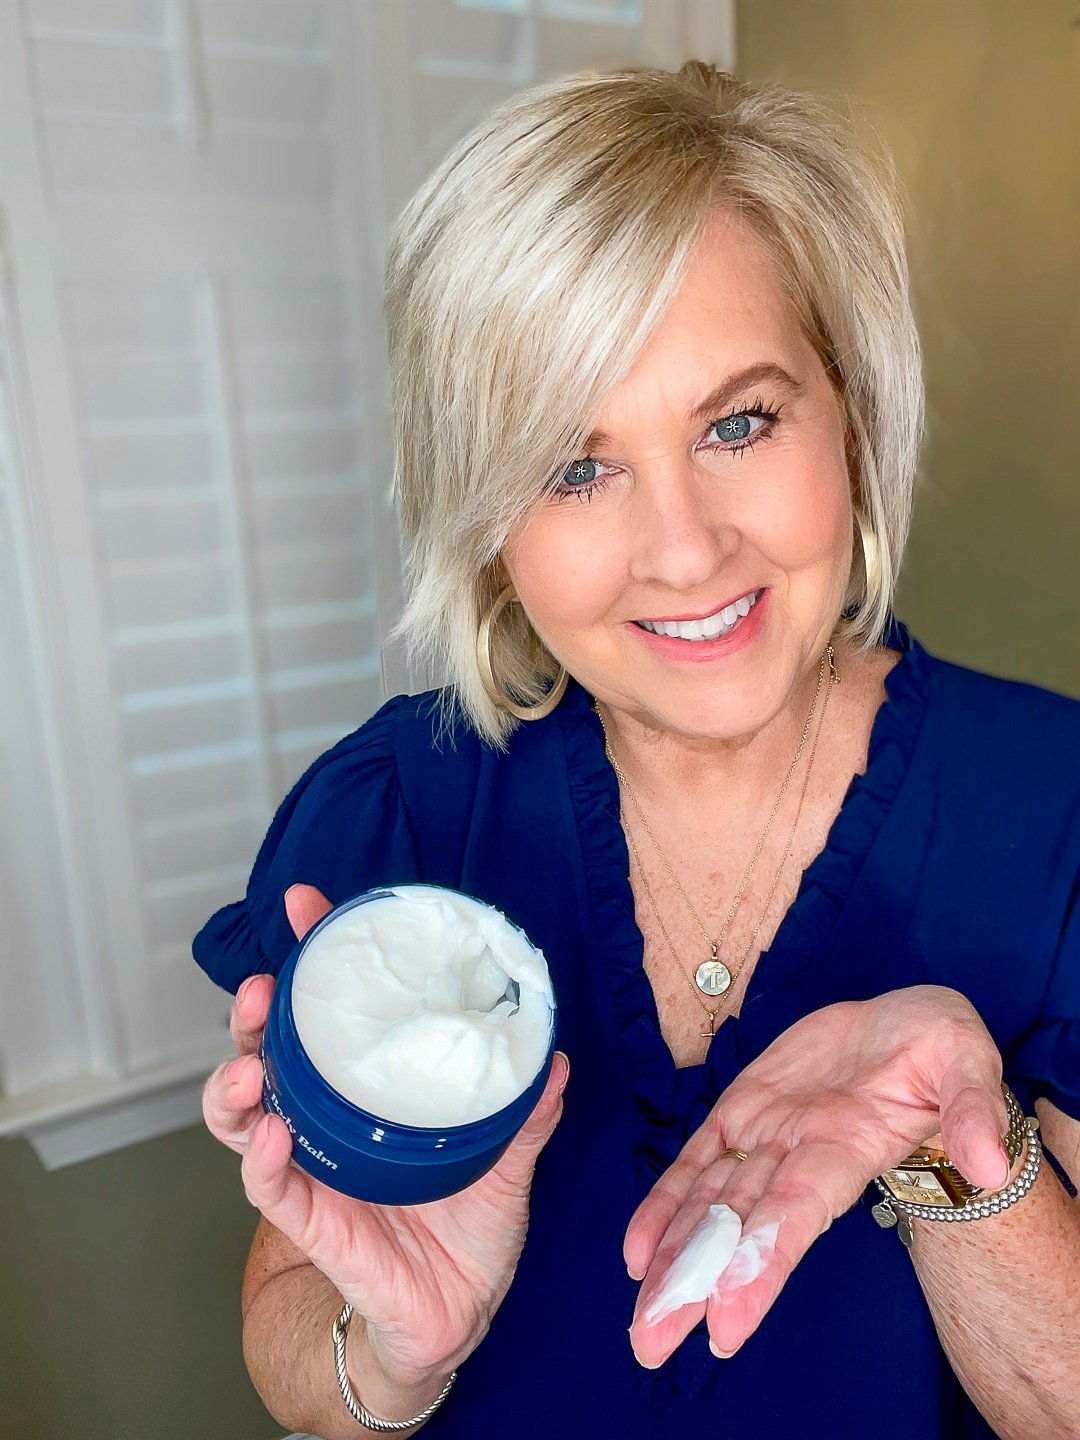 Over 40 Fashion Blogger, Tania Stephens is wearing a blue top and trying City Beauty's Inviscrepe Body Balm 2